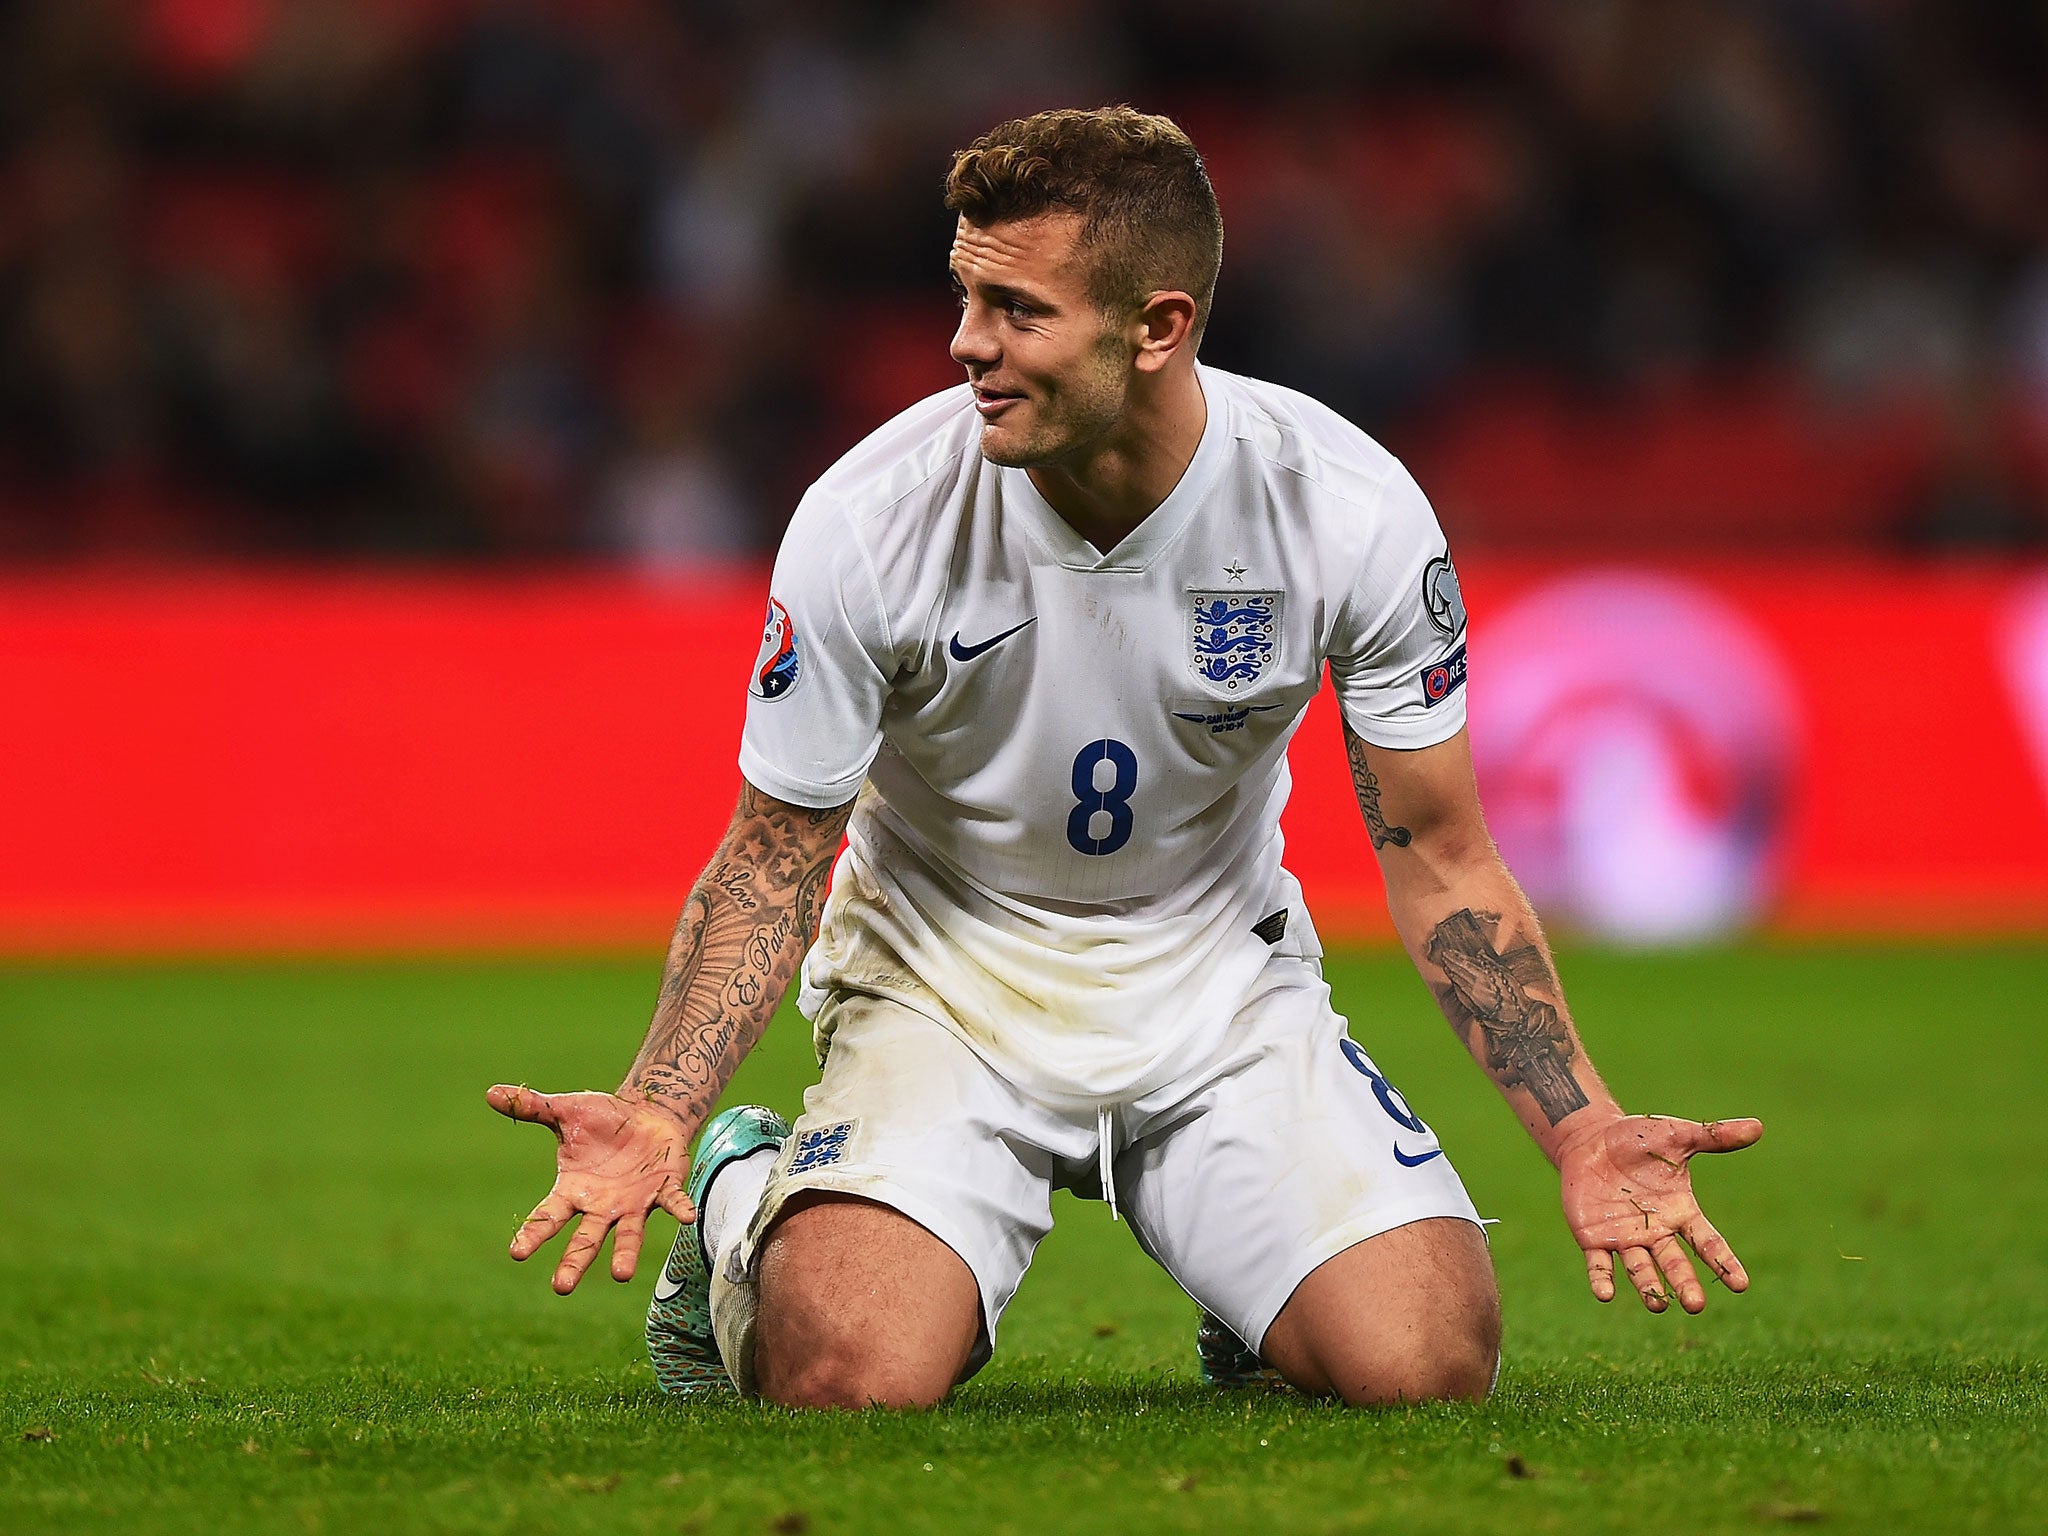 England midfielder Jack Wilshere was named man of the match against San Marino